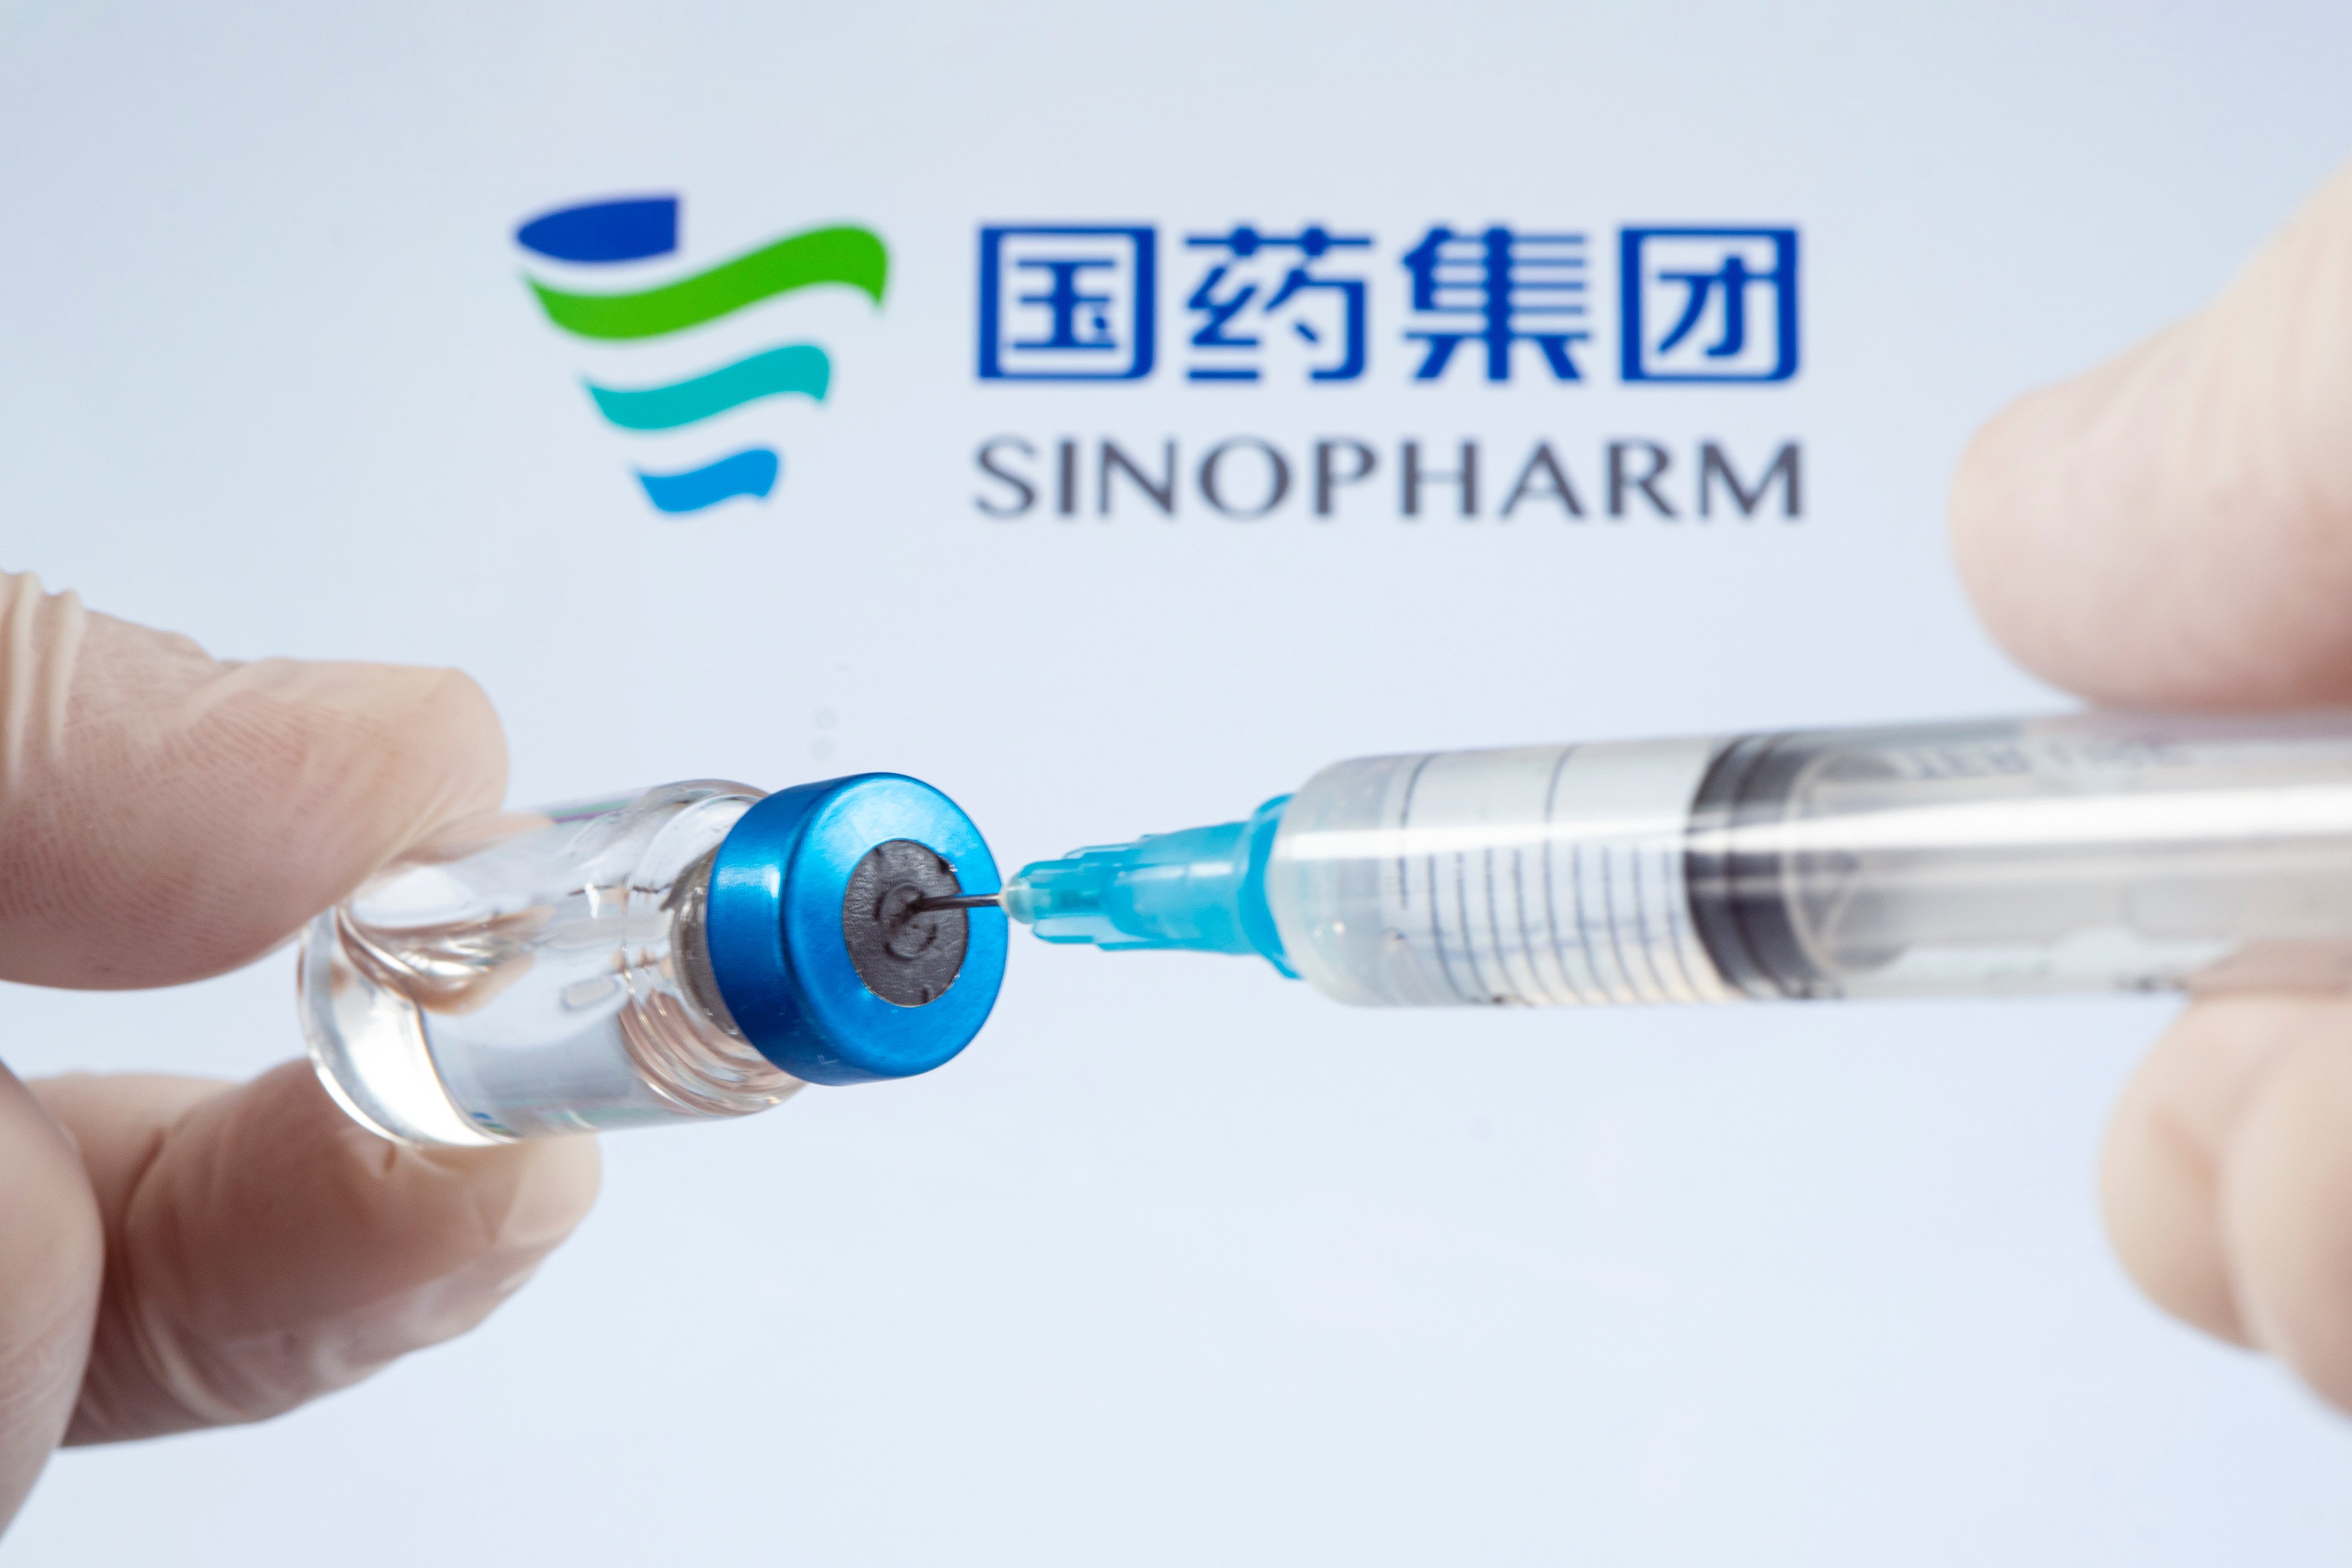 Which in vaccine country made sinopharm What's the